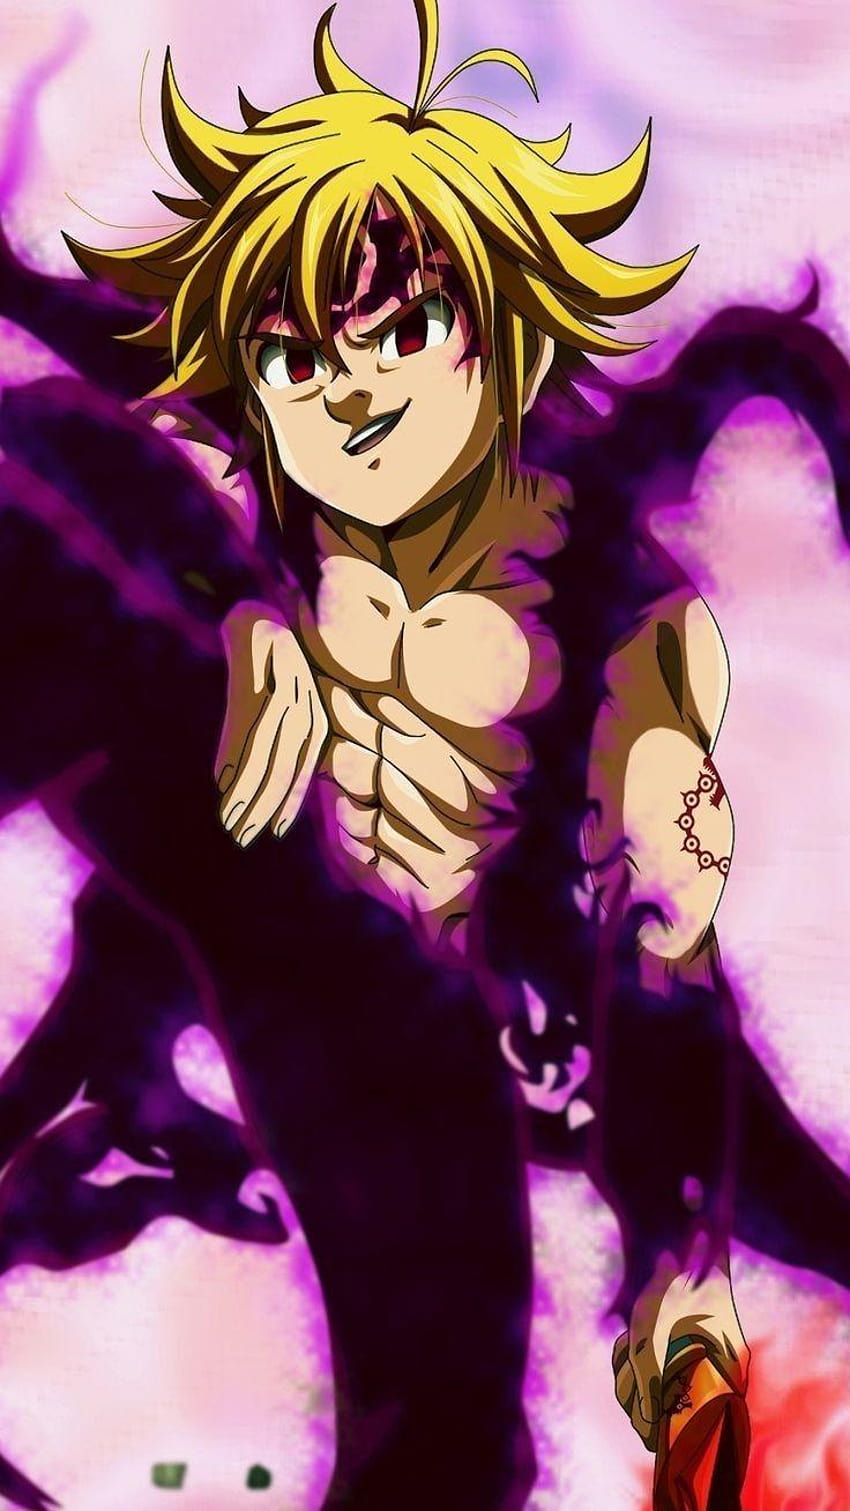 The Pre Demon King Form of Meliodas from Nanatsu No Taizai, meliodas demon king form mobile HD phone wallpaper